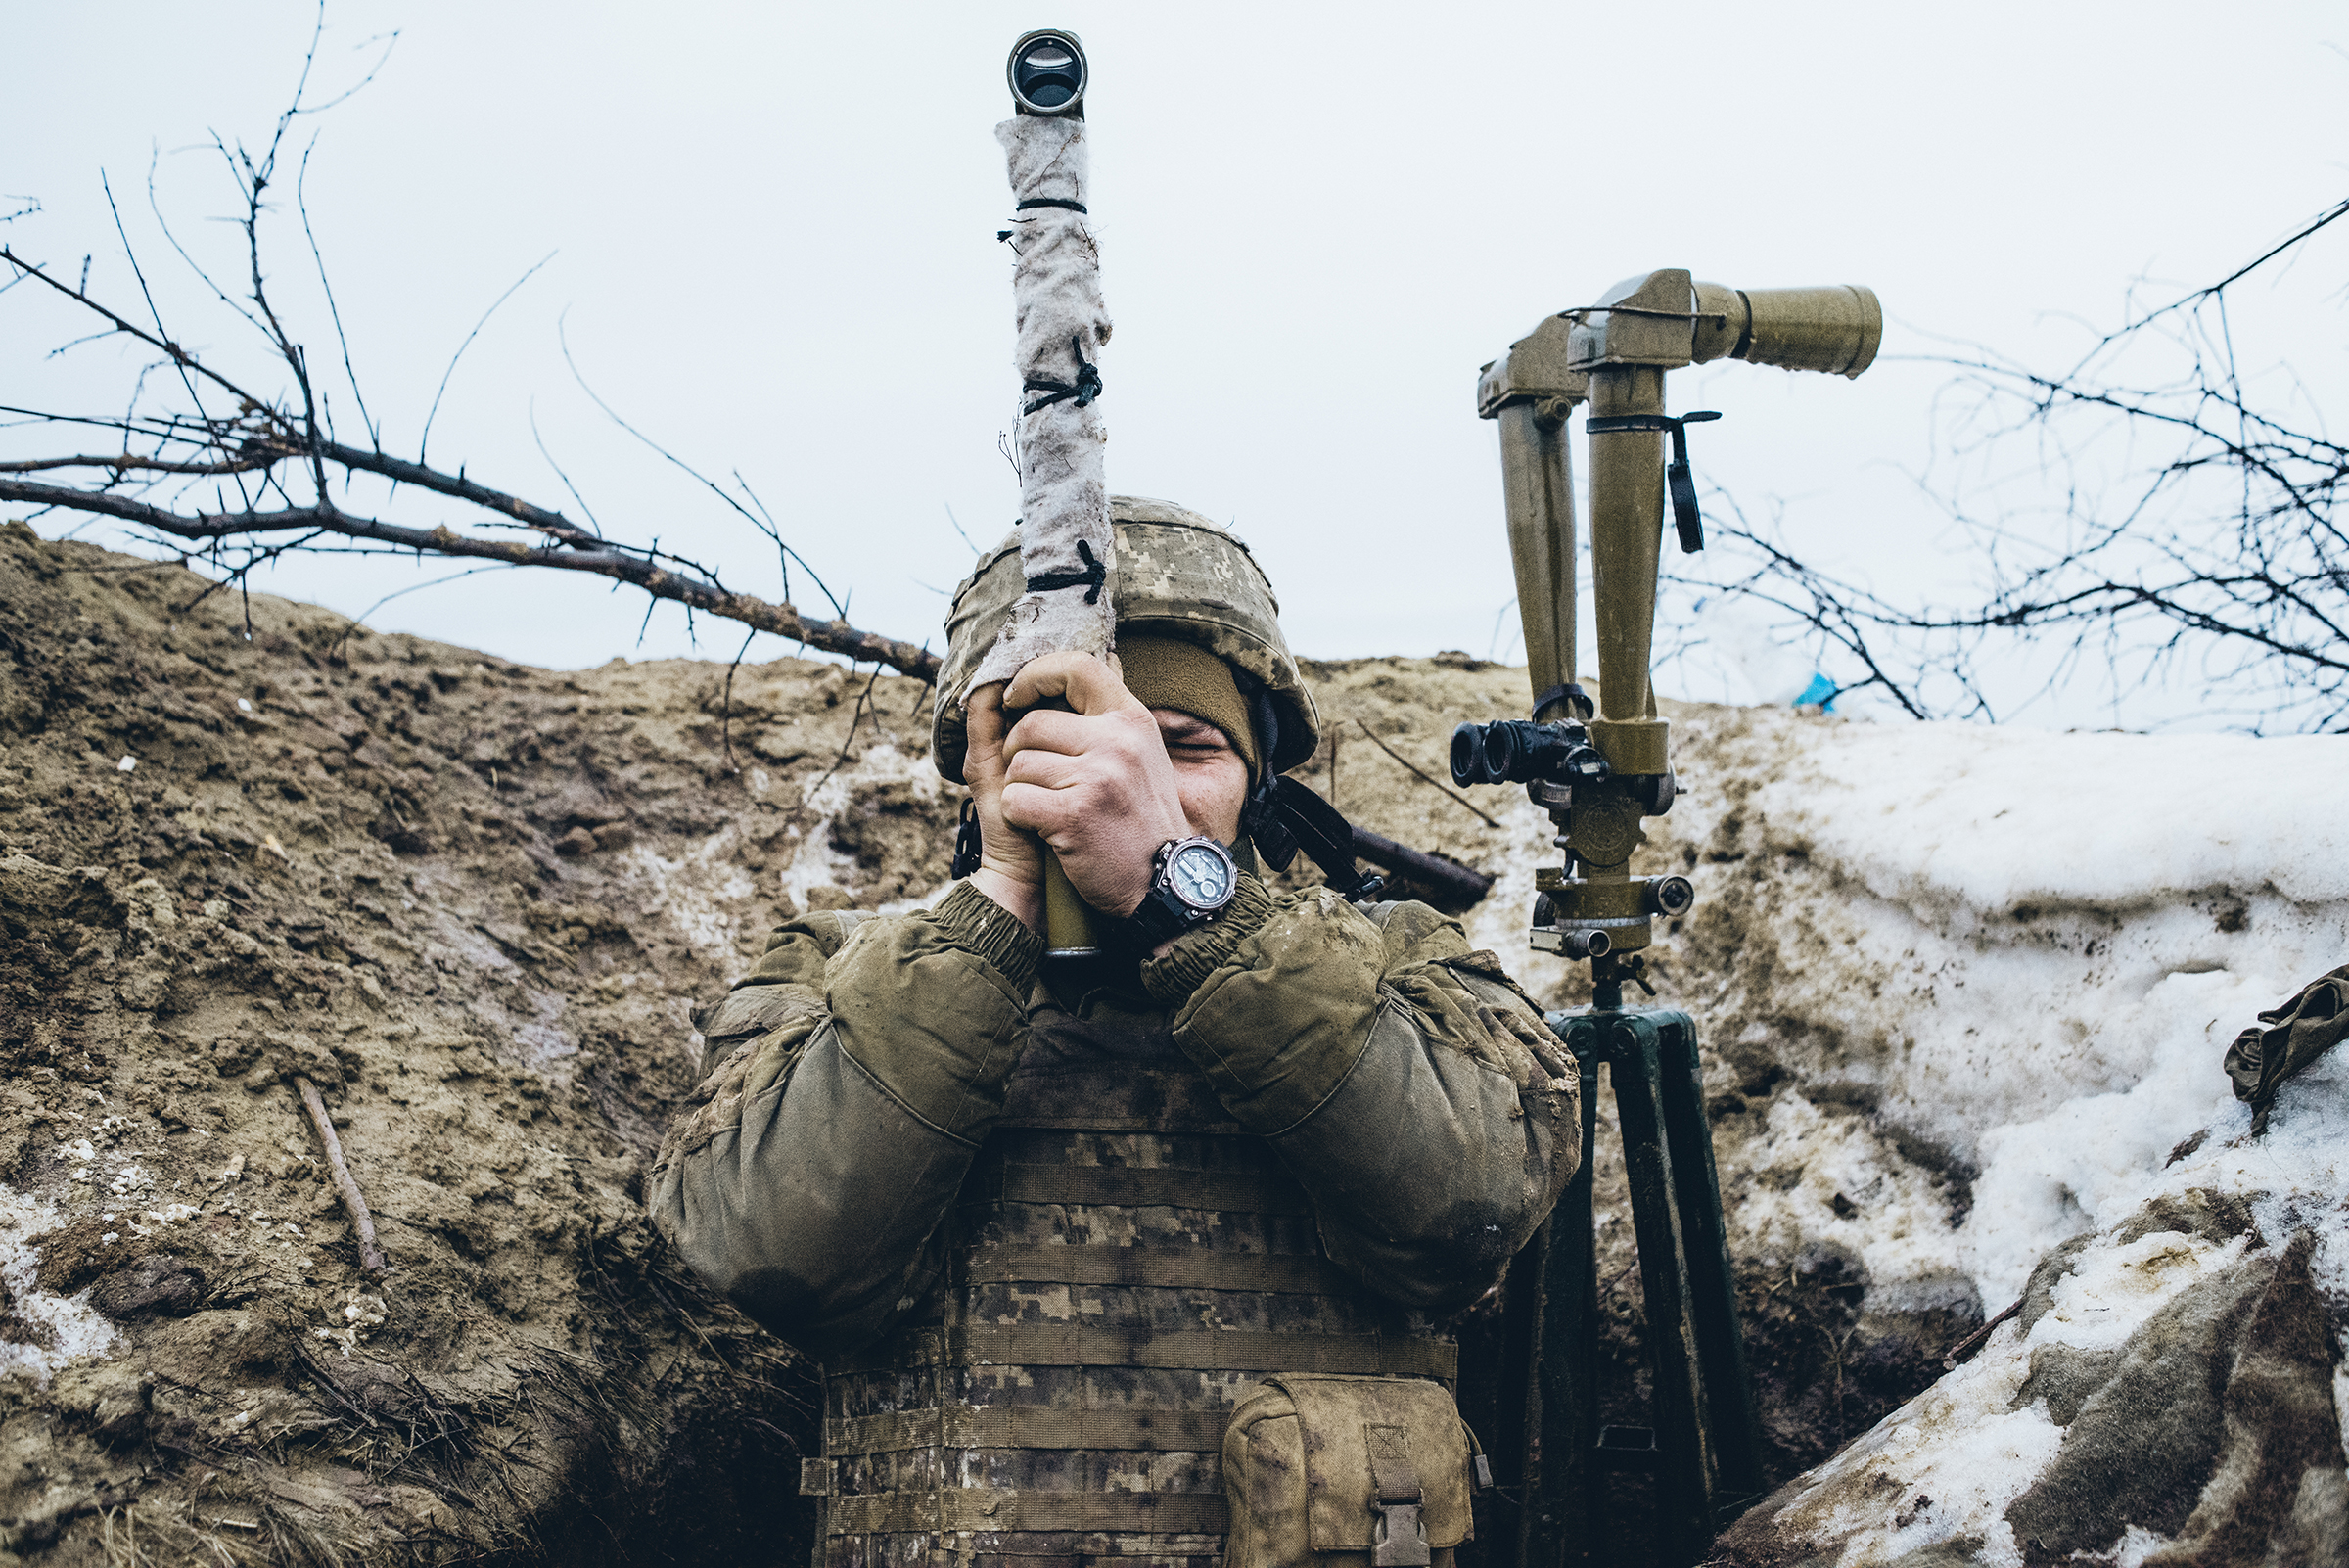 A Ukrainian soldier observes pro-Russian forces amassed on the front line in the breakaway Donetsk region of Ukraine on Feb. 8. (Maxim Dondyuk for TIME)